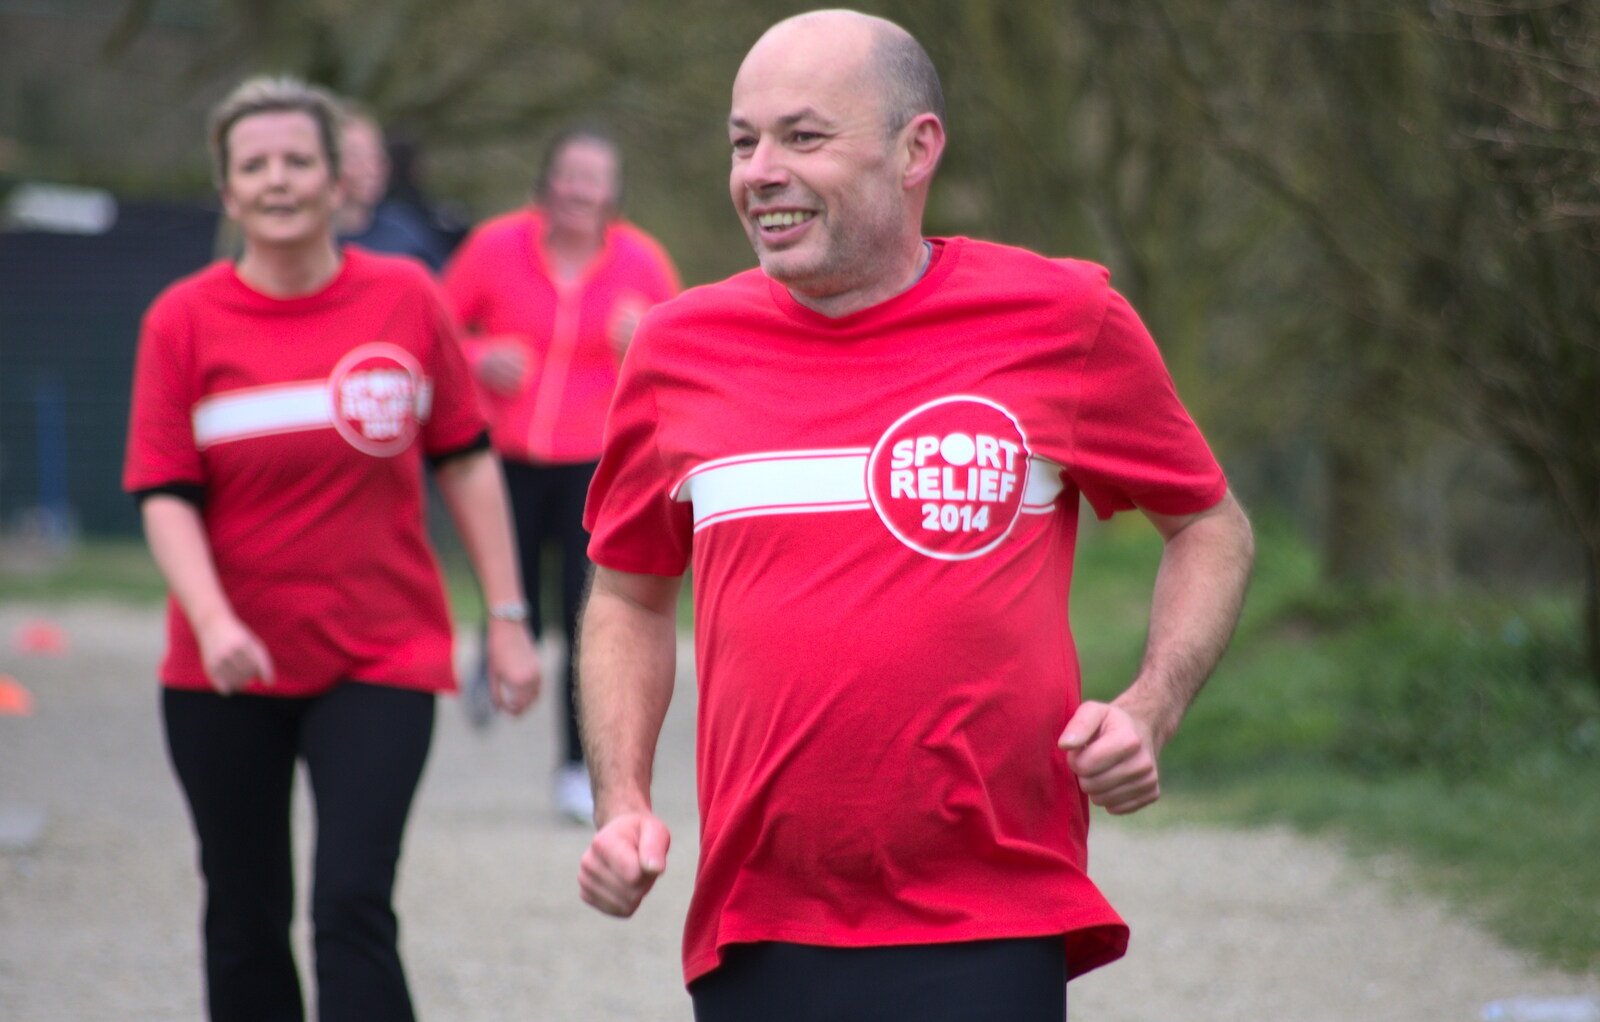 Mr. Sport Relief comes in for the finish from Isobel's Fun Run, Hartismere High, Eye, Suffolk - 23rd March 2014